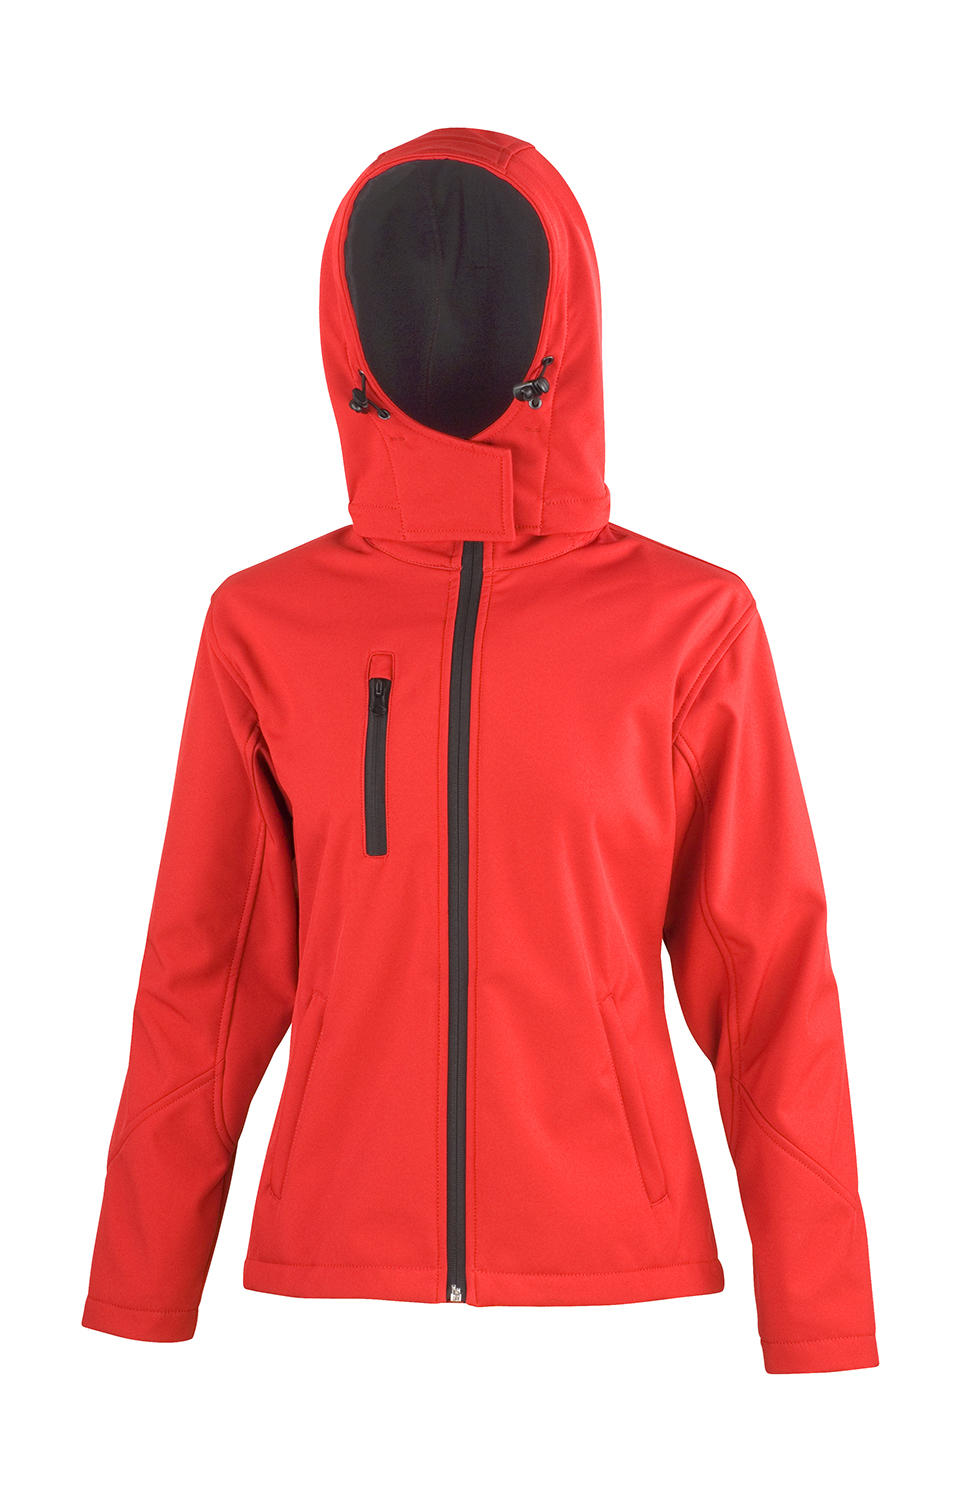  Ladies TX Performance Hooded Softshell Jacket in Farbe Red/Black